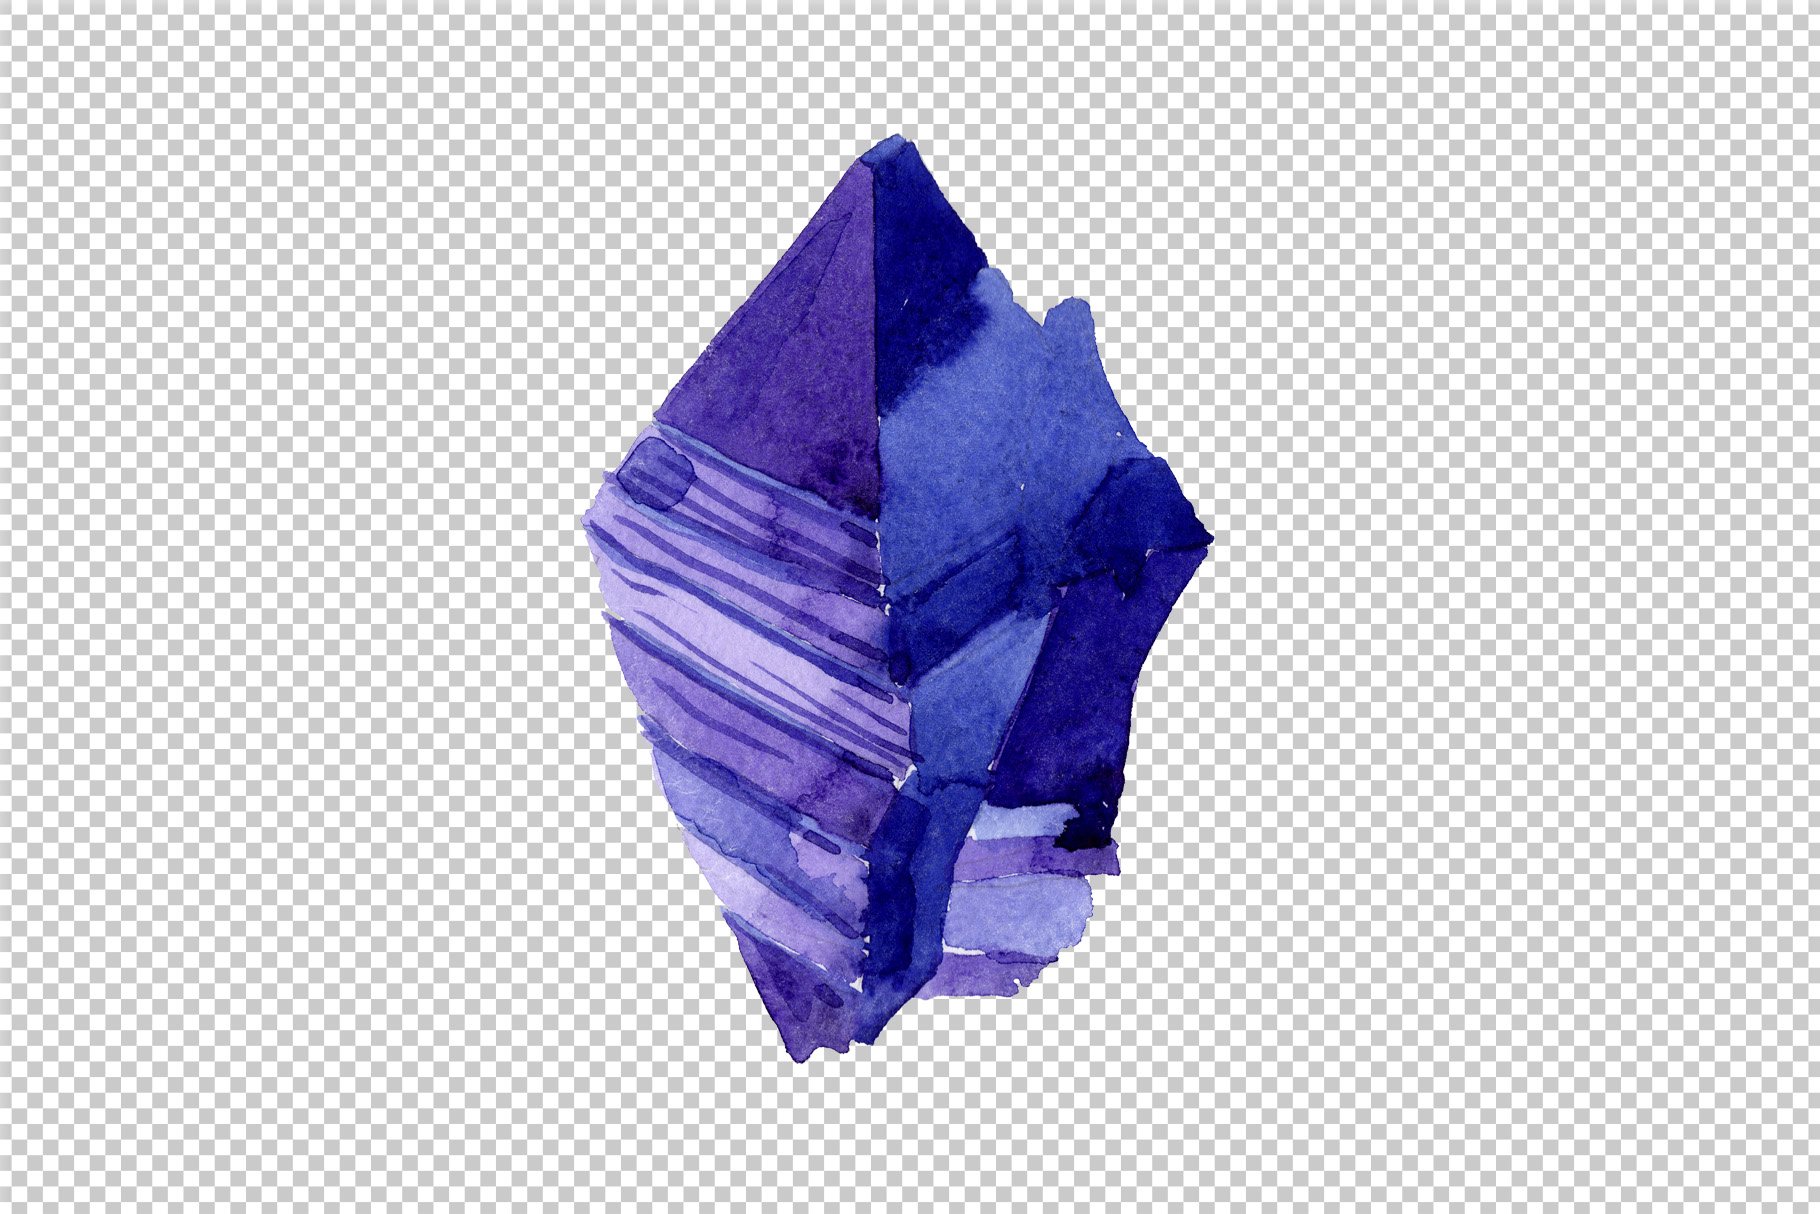 Aquarelle geometric blue crystal PNG preview image.